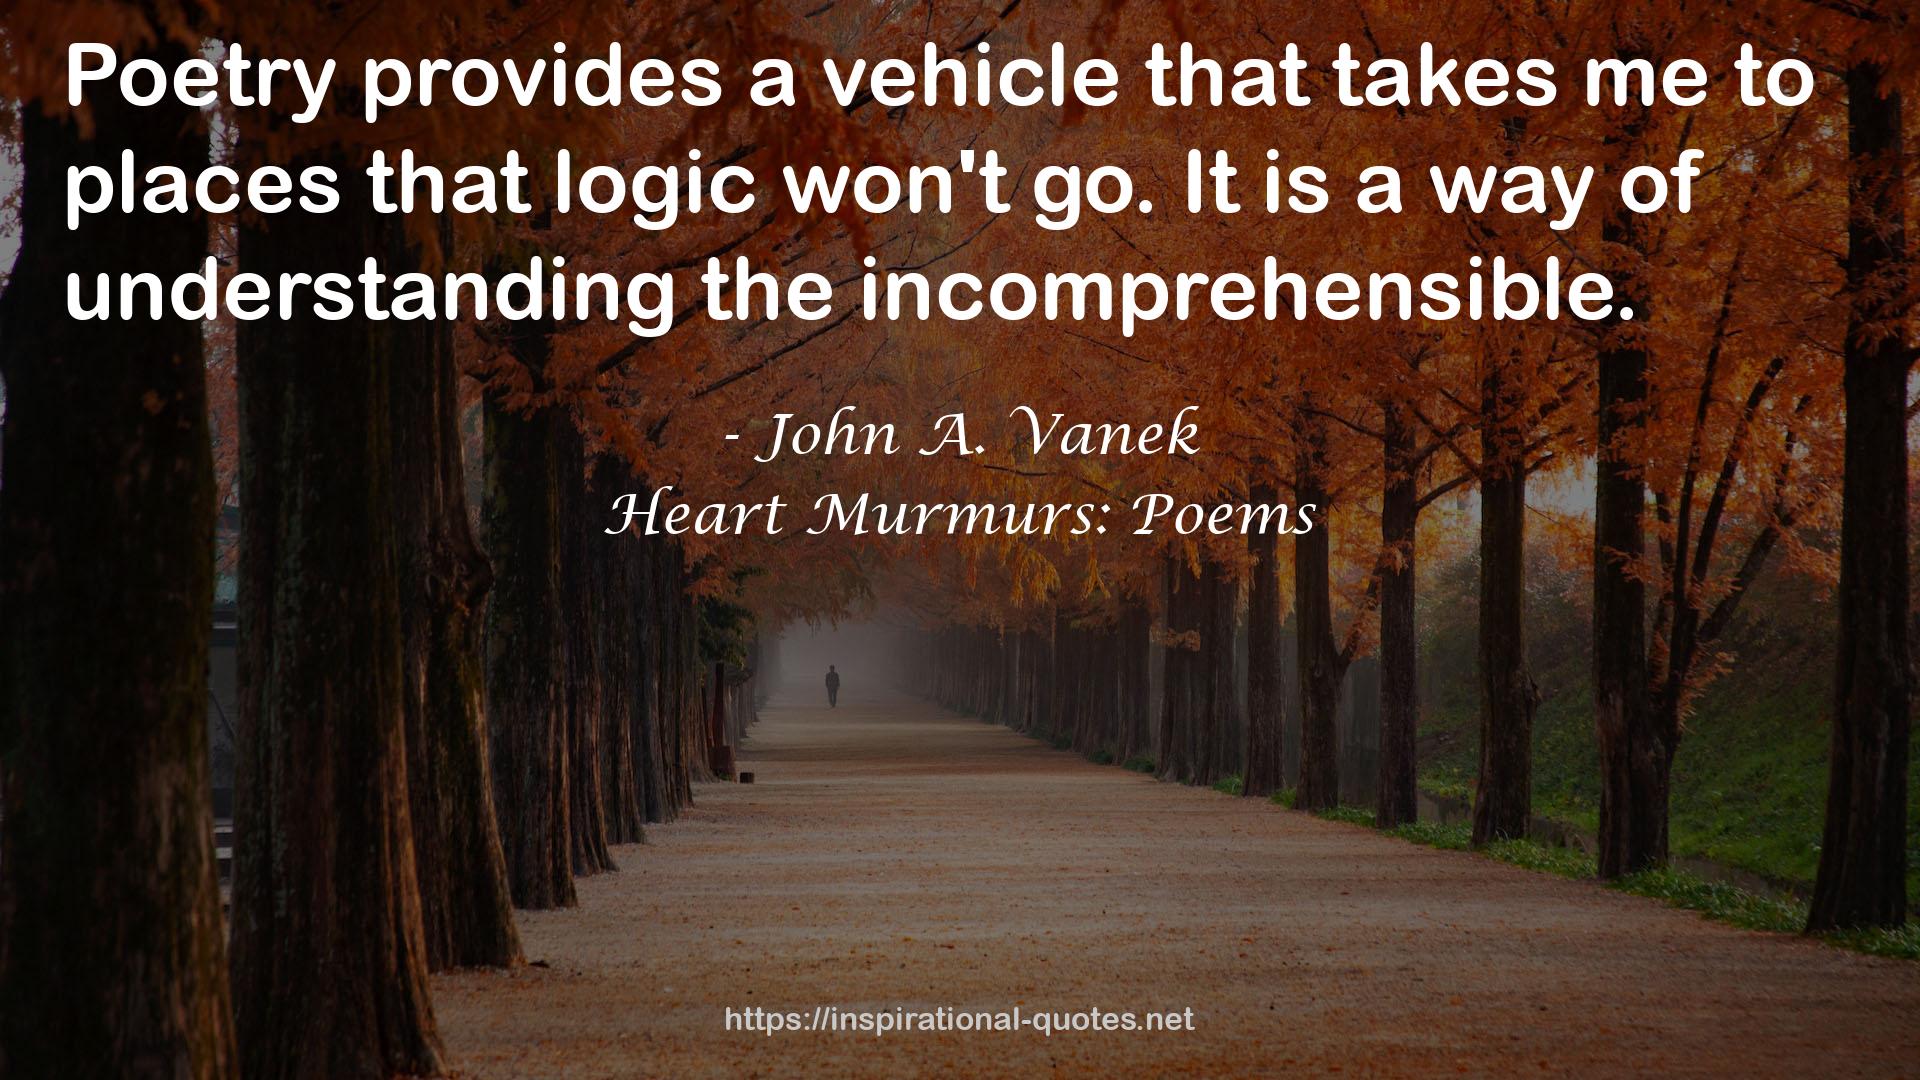 Heart Murmurs: Poems QUOTES